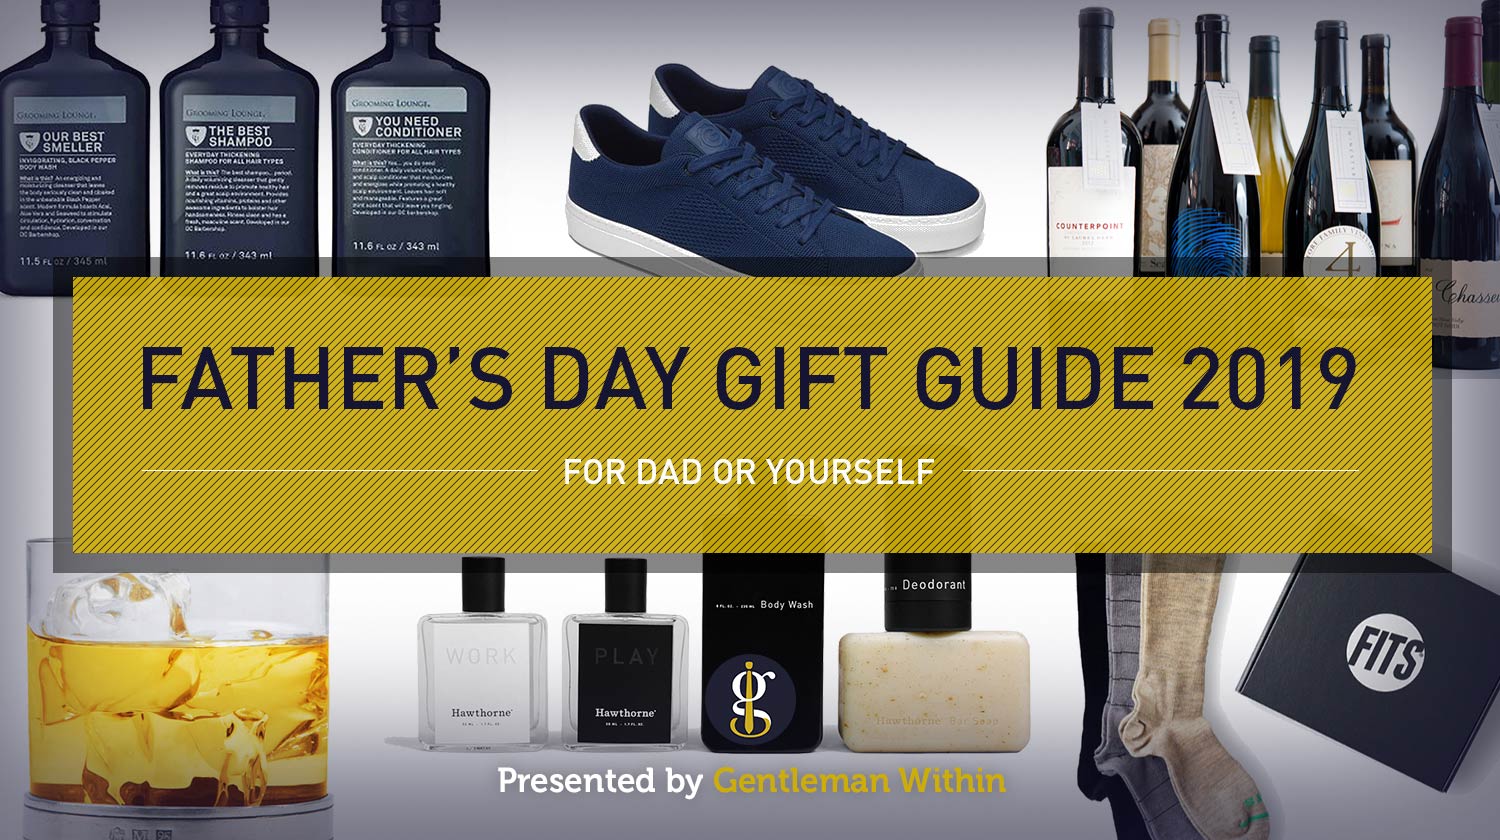 Last Minute Father's Day Gift Ideas 2019 | GENTLEMAN WITHIN